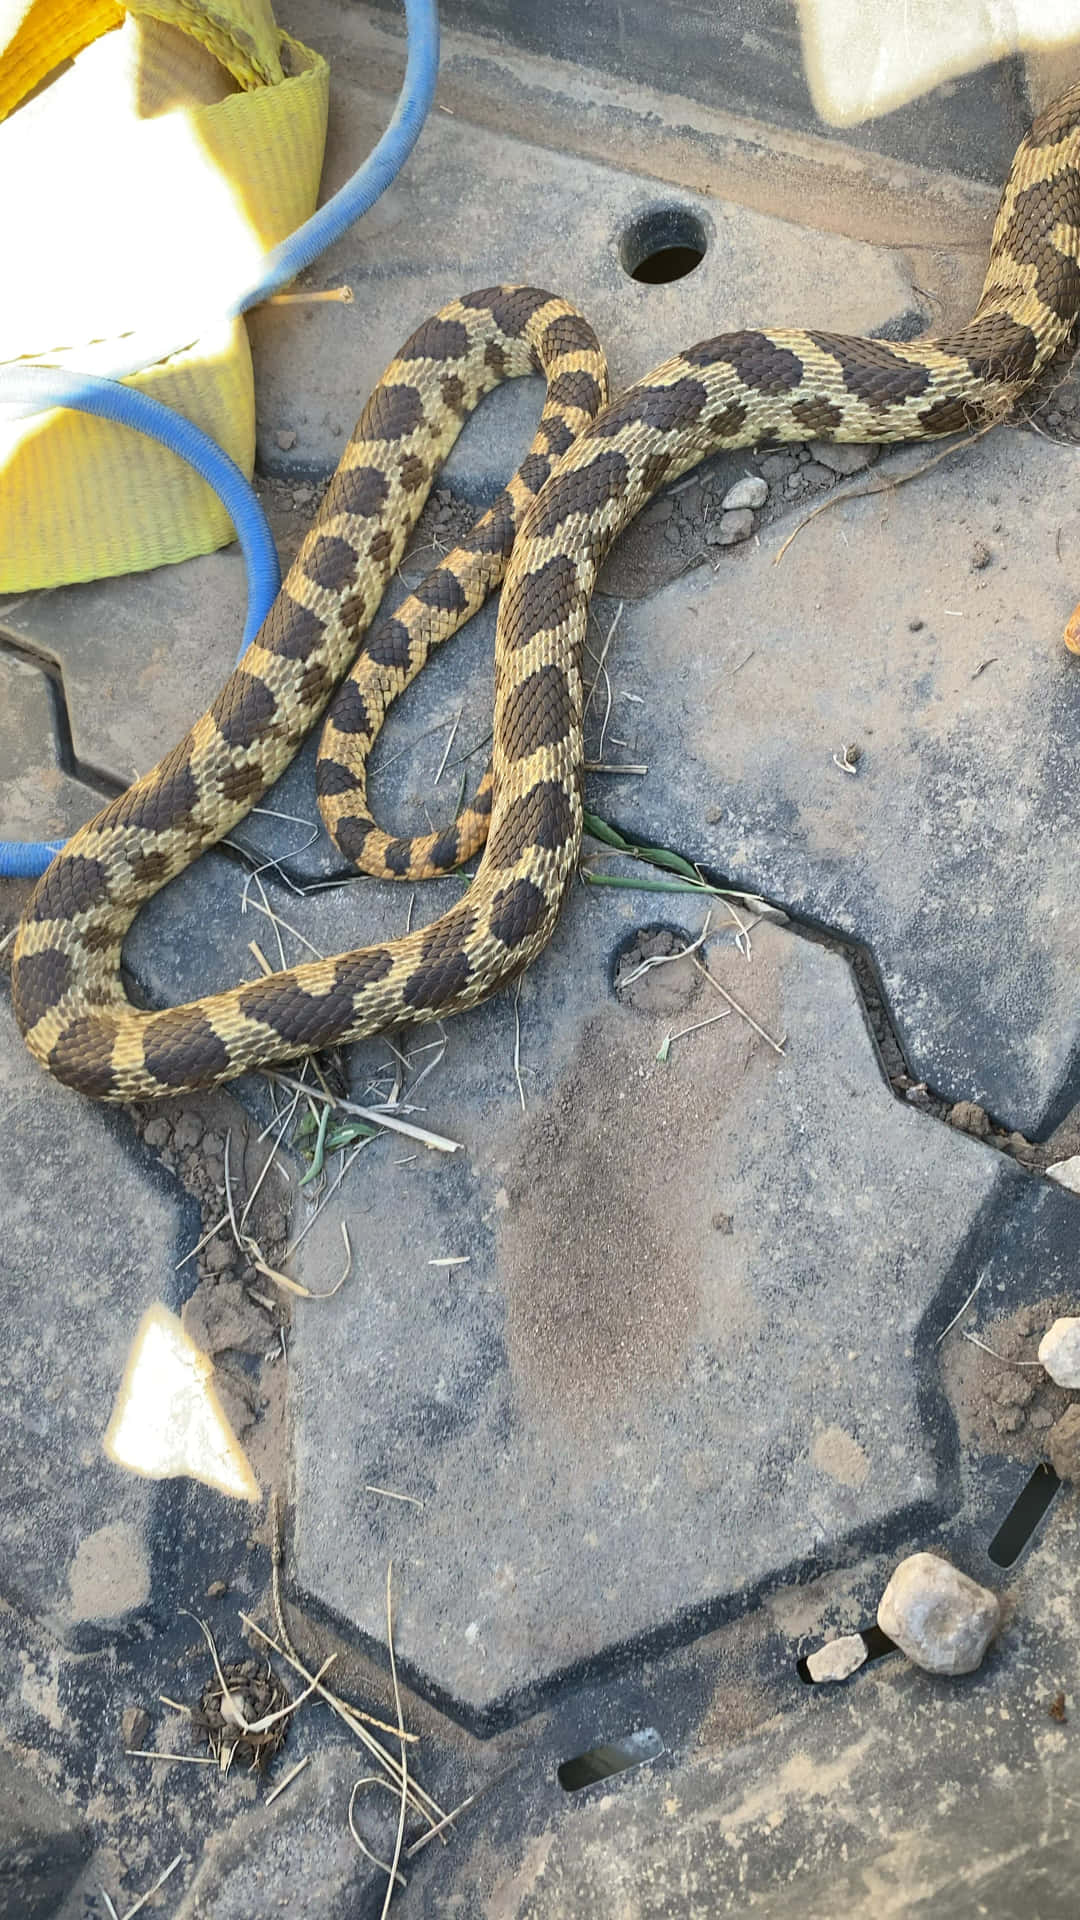 A Snake On The Ground